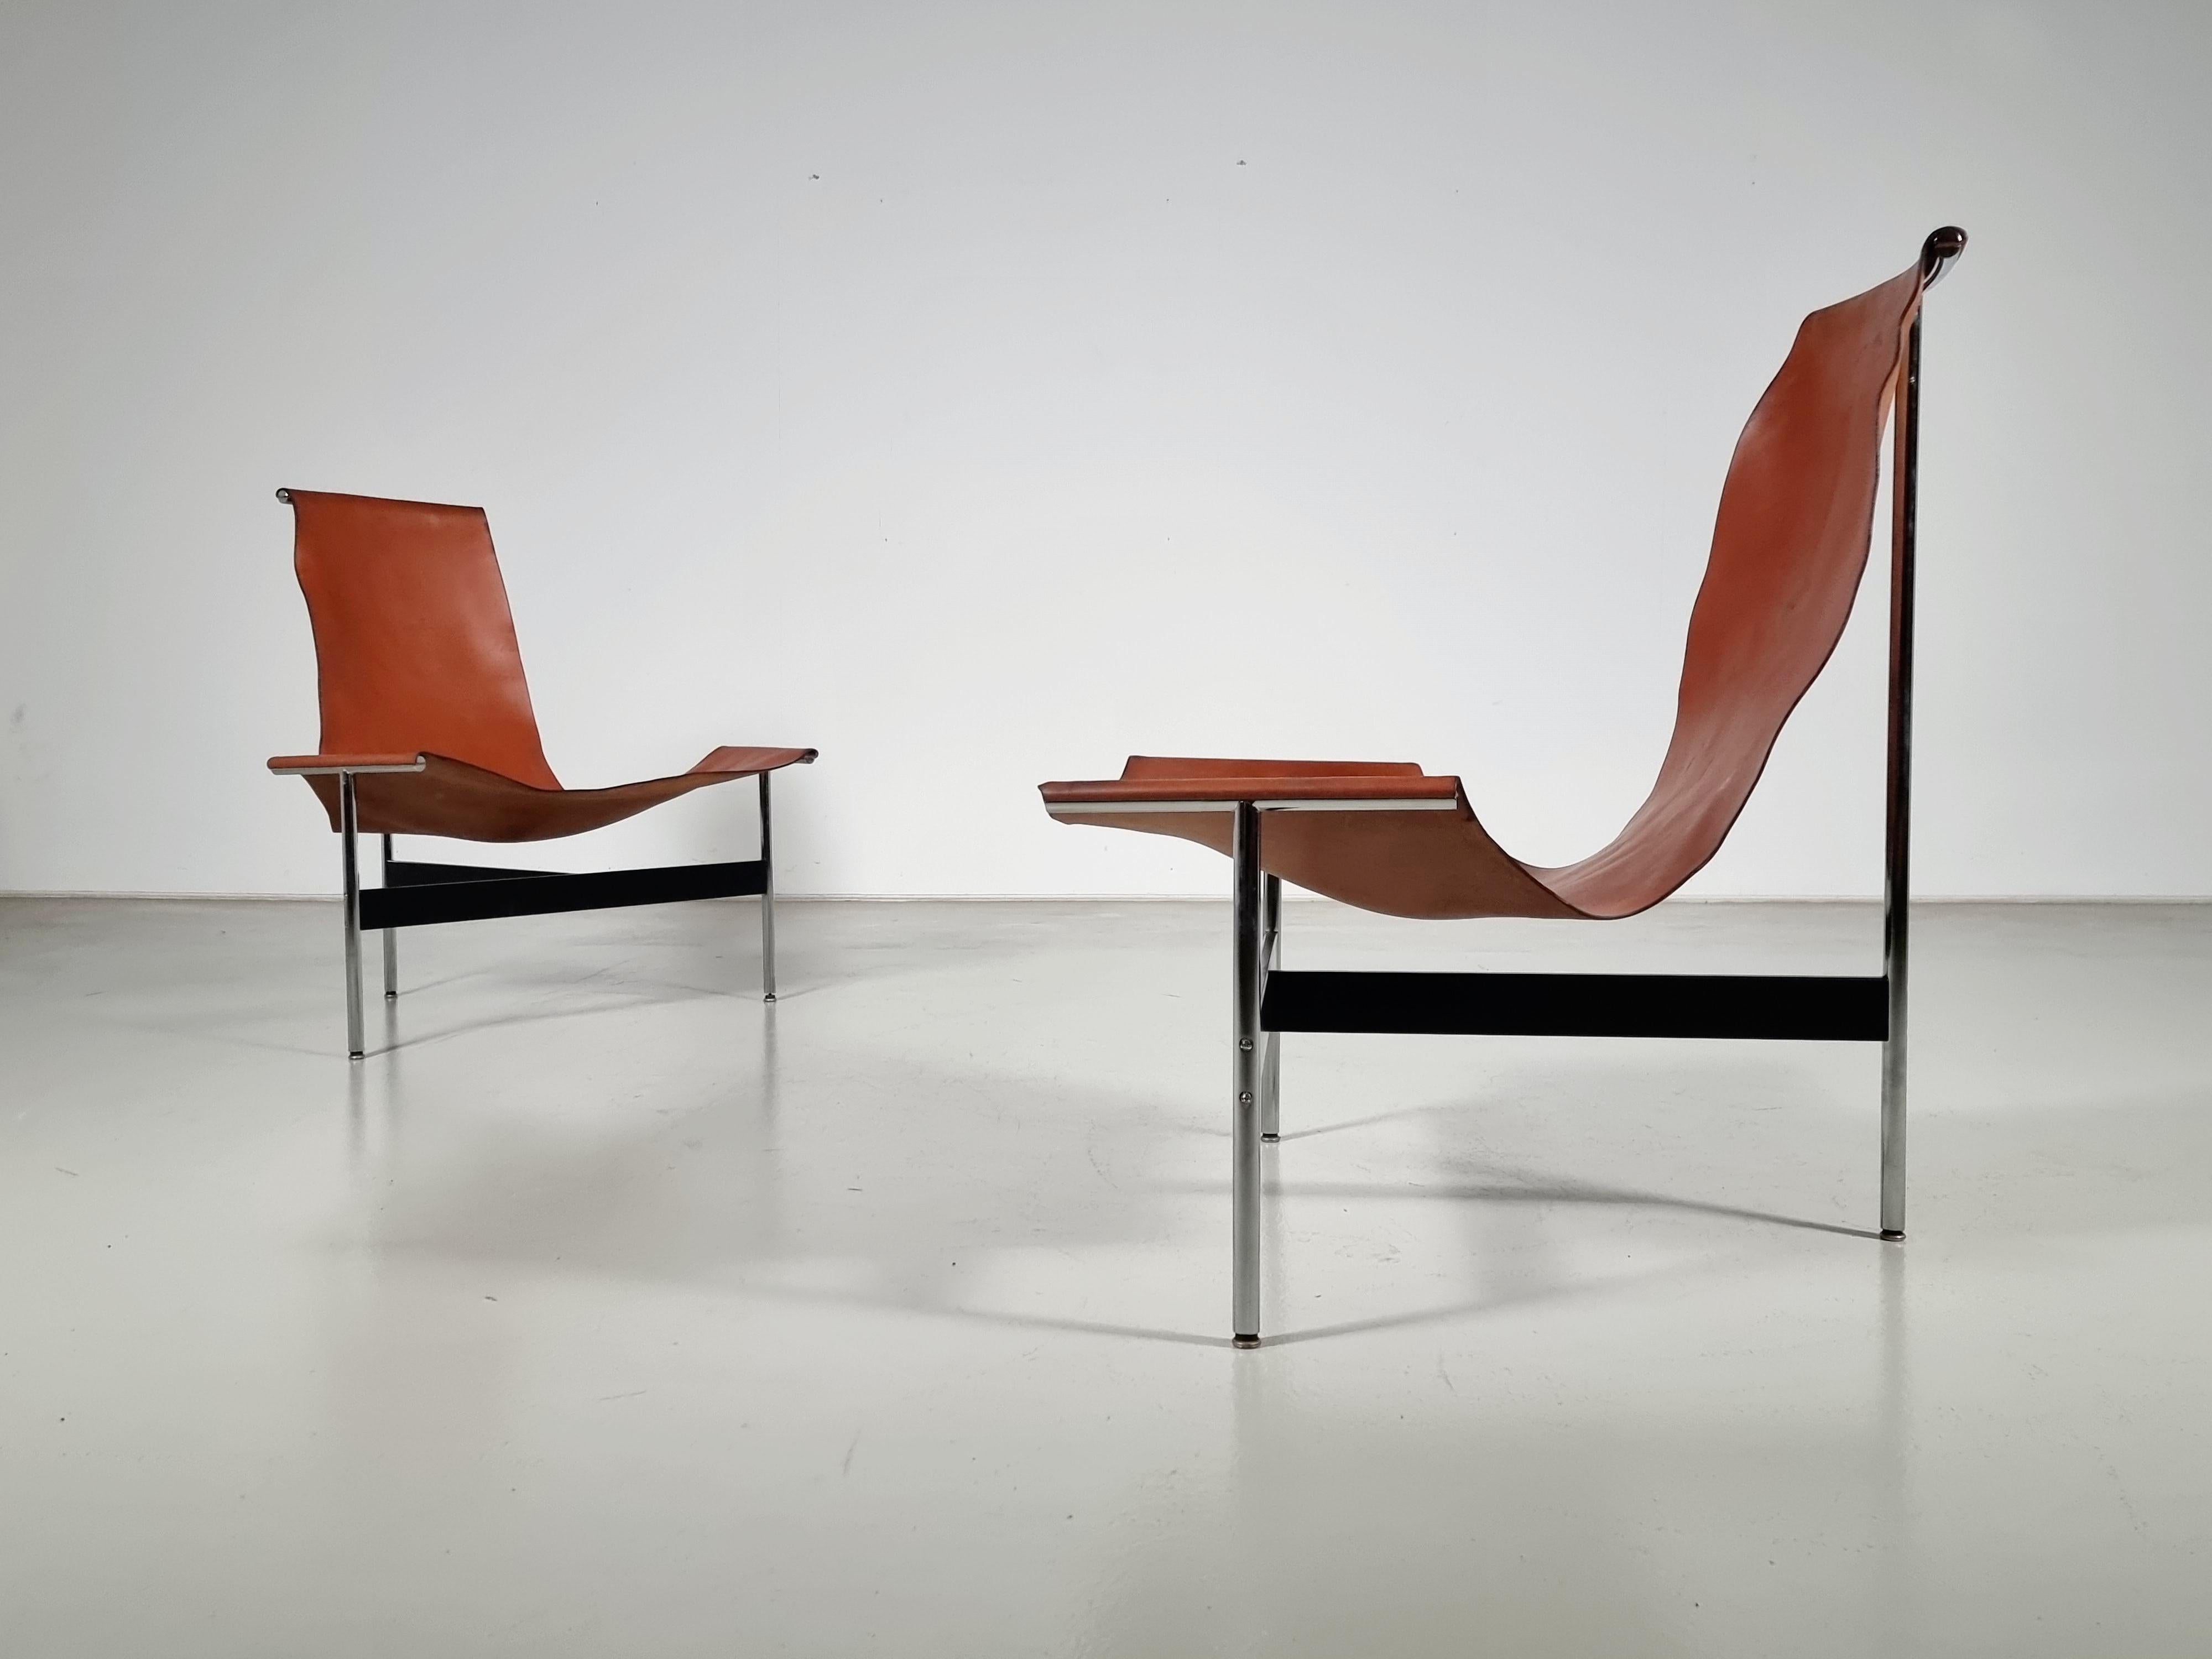 Leather '3LC' T-Chairs by Katavolos, Littell and Kelley for Laverne International, 1950s For Sale